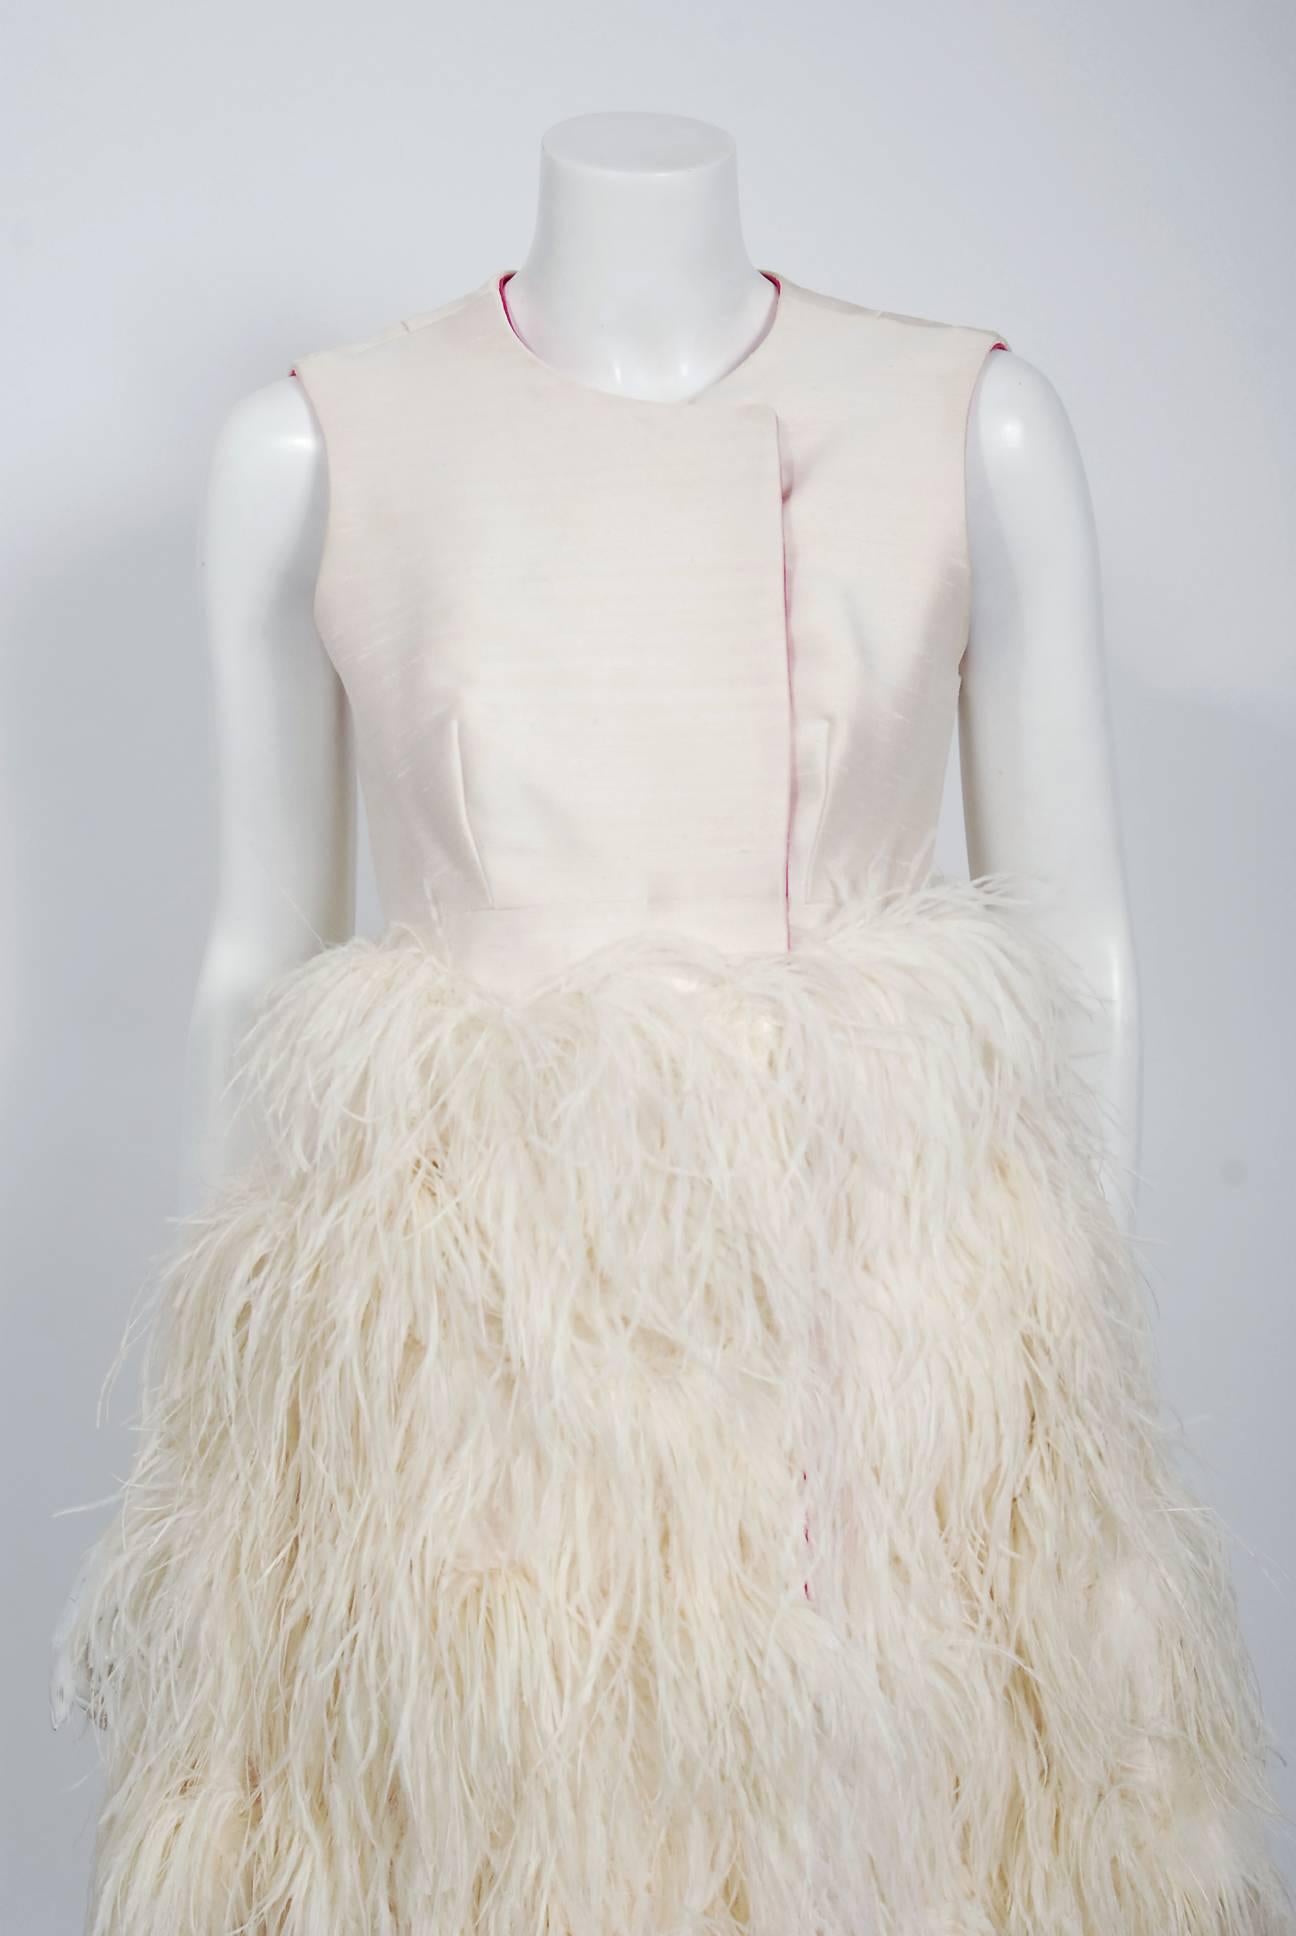 Exquisite 1960's ivory-creme textured silk cocktail from the famous Mr. Blackwell custom label. To this chic show-stopper, he adds rows of genuine ostrich feathers which add so much depth and texture. The sleeveless bodice has hidden side snaps with